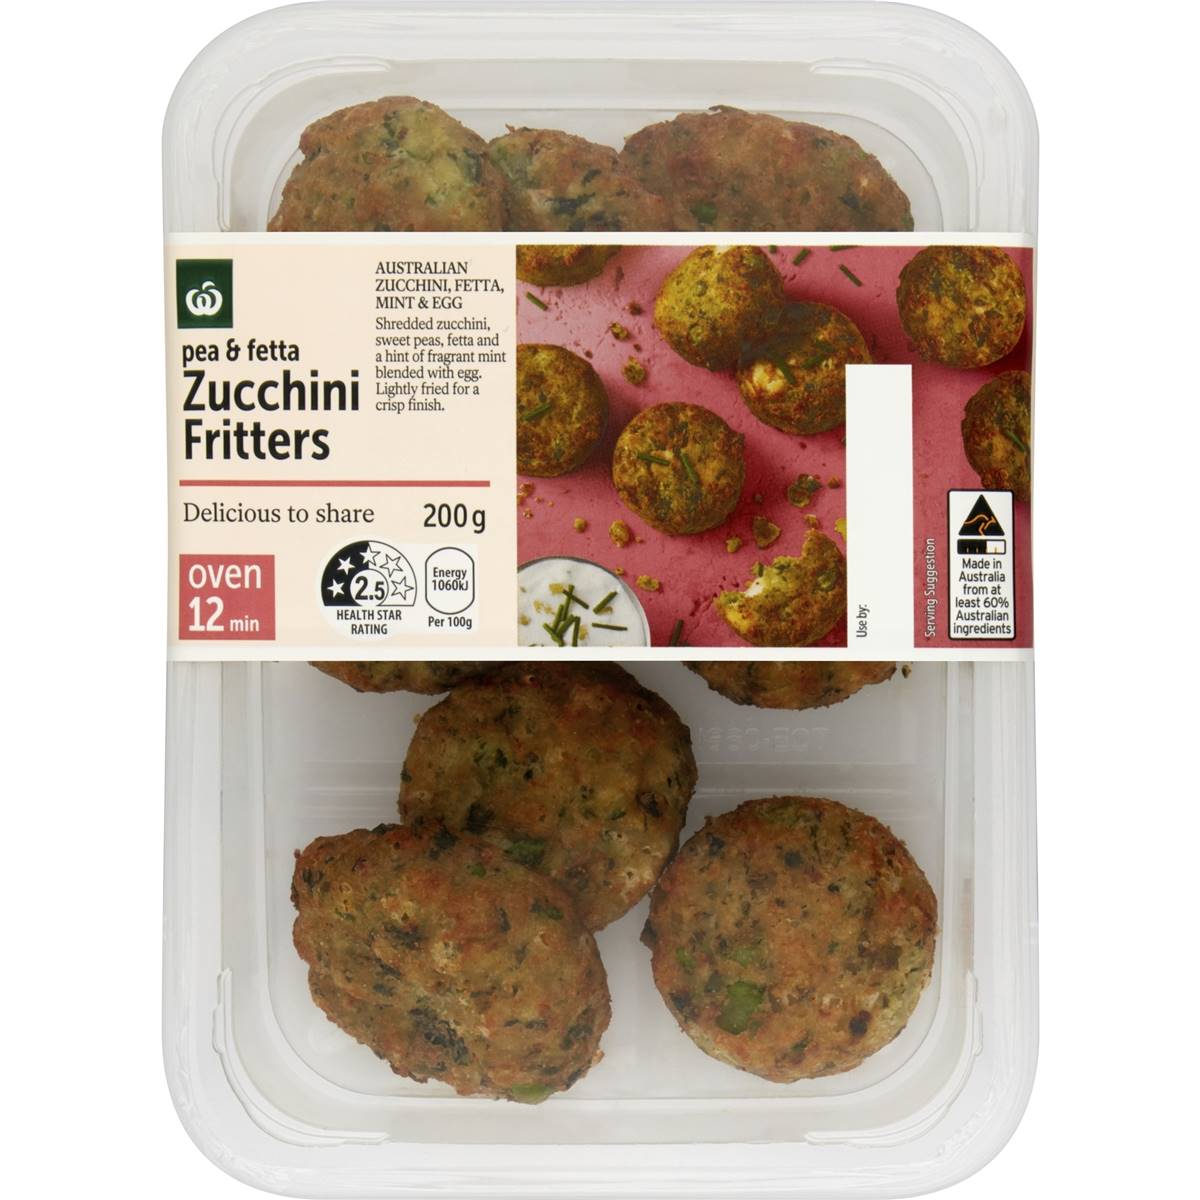 Calories in Woolworths Pea & Fetta Zucchini Fritters